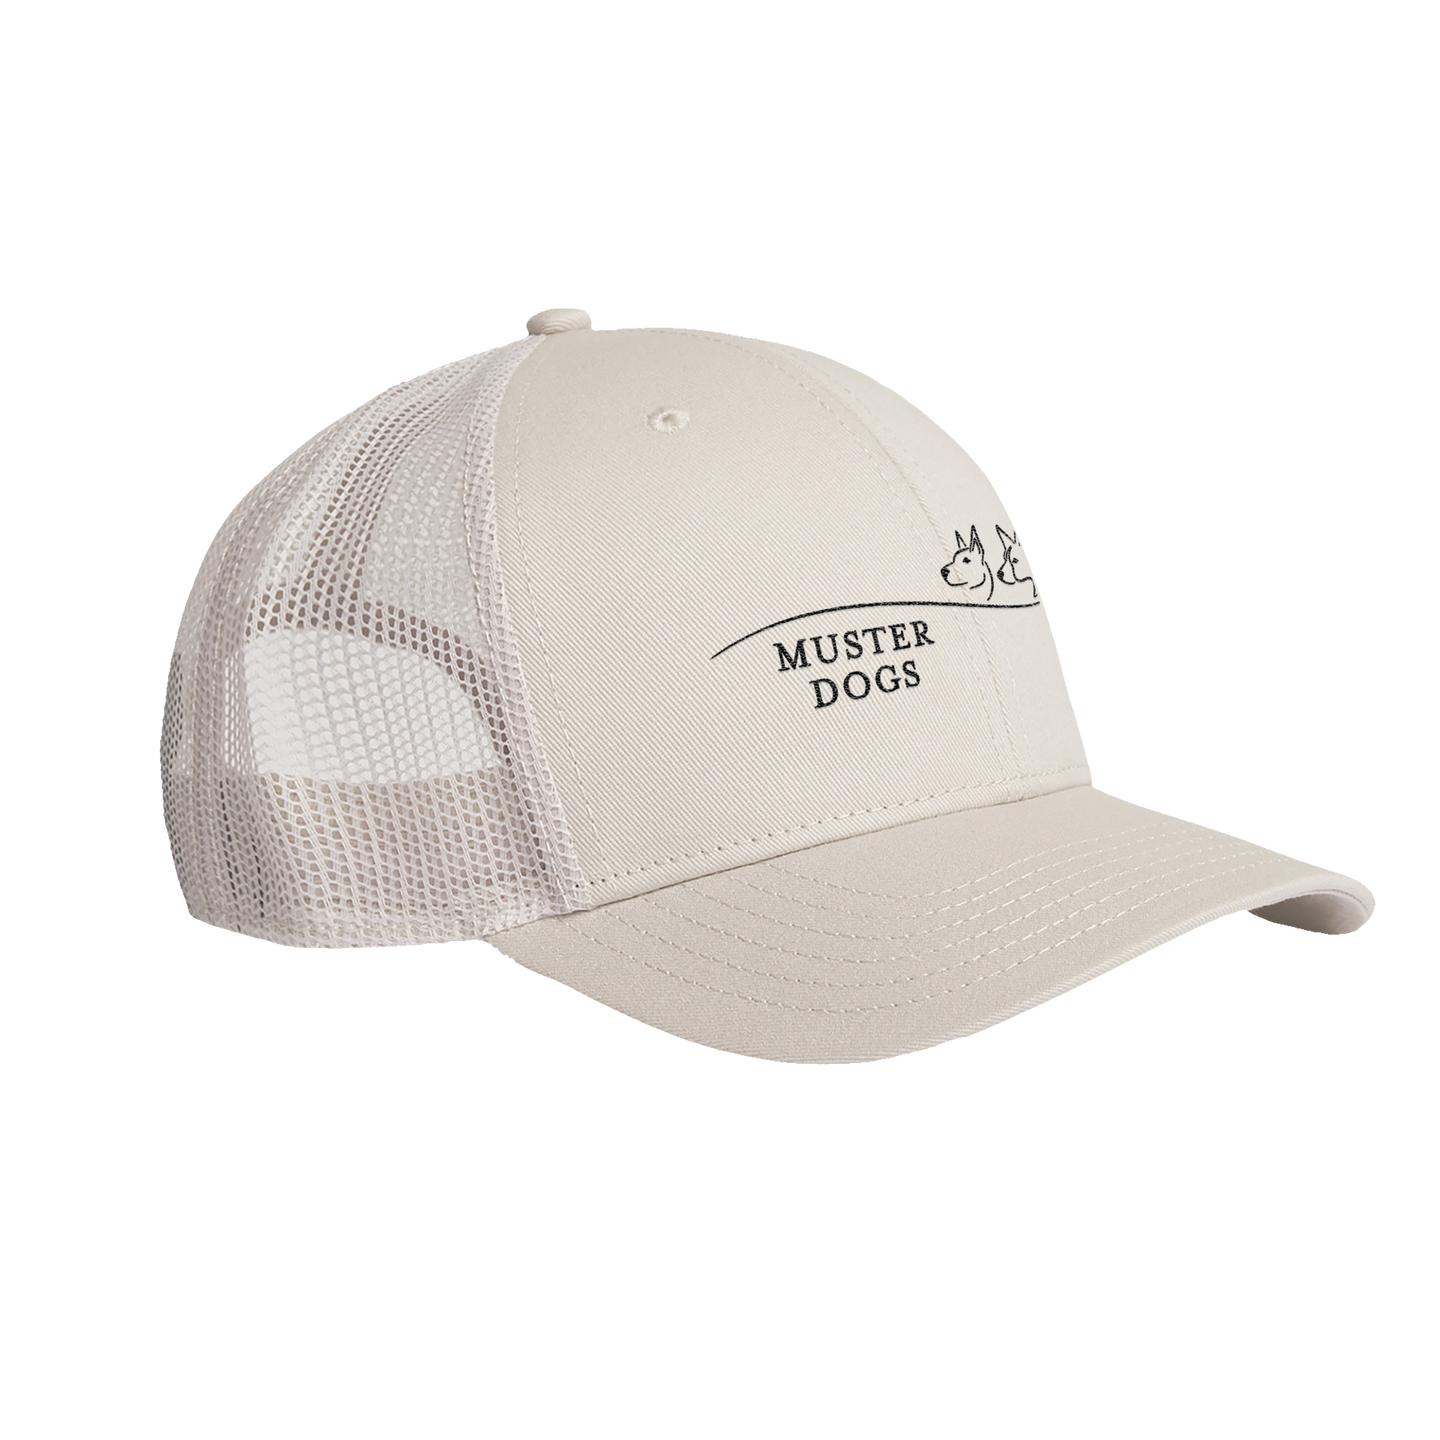 Muster Dogs Off White Cap